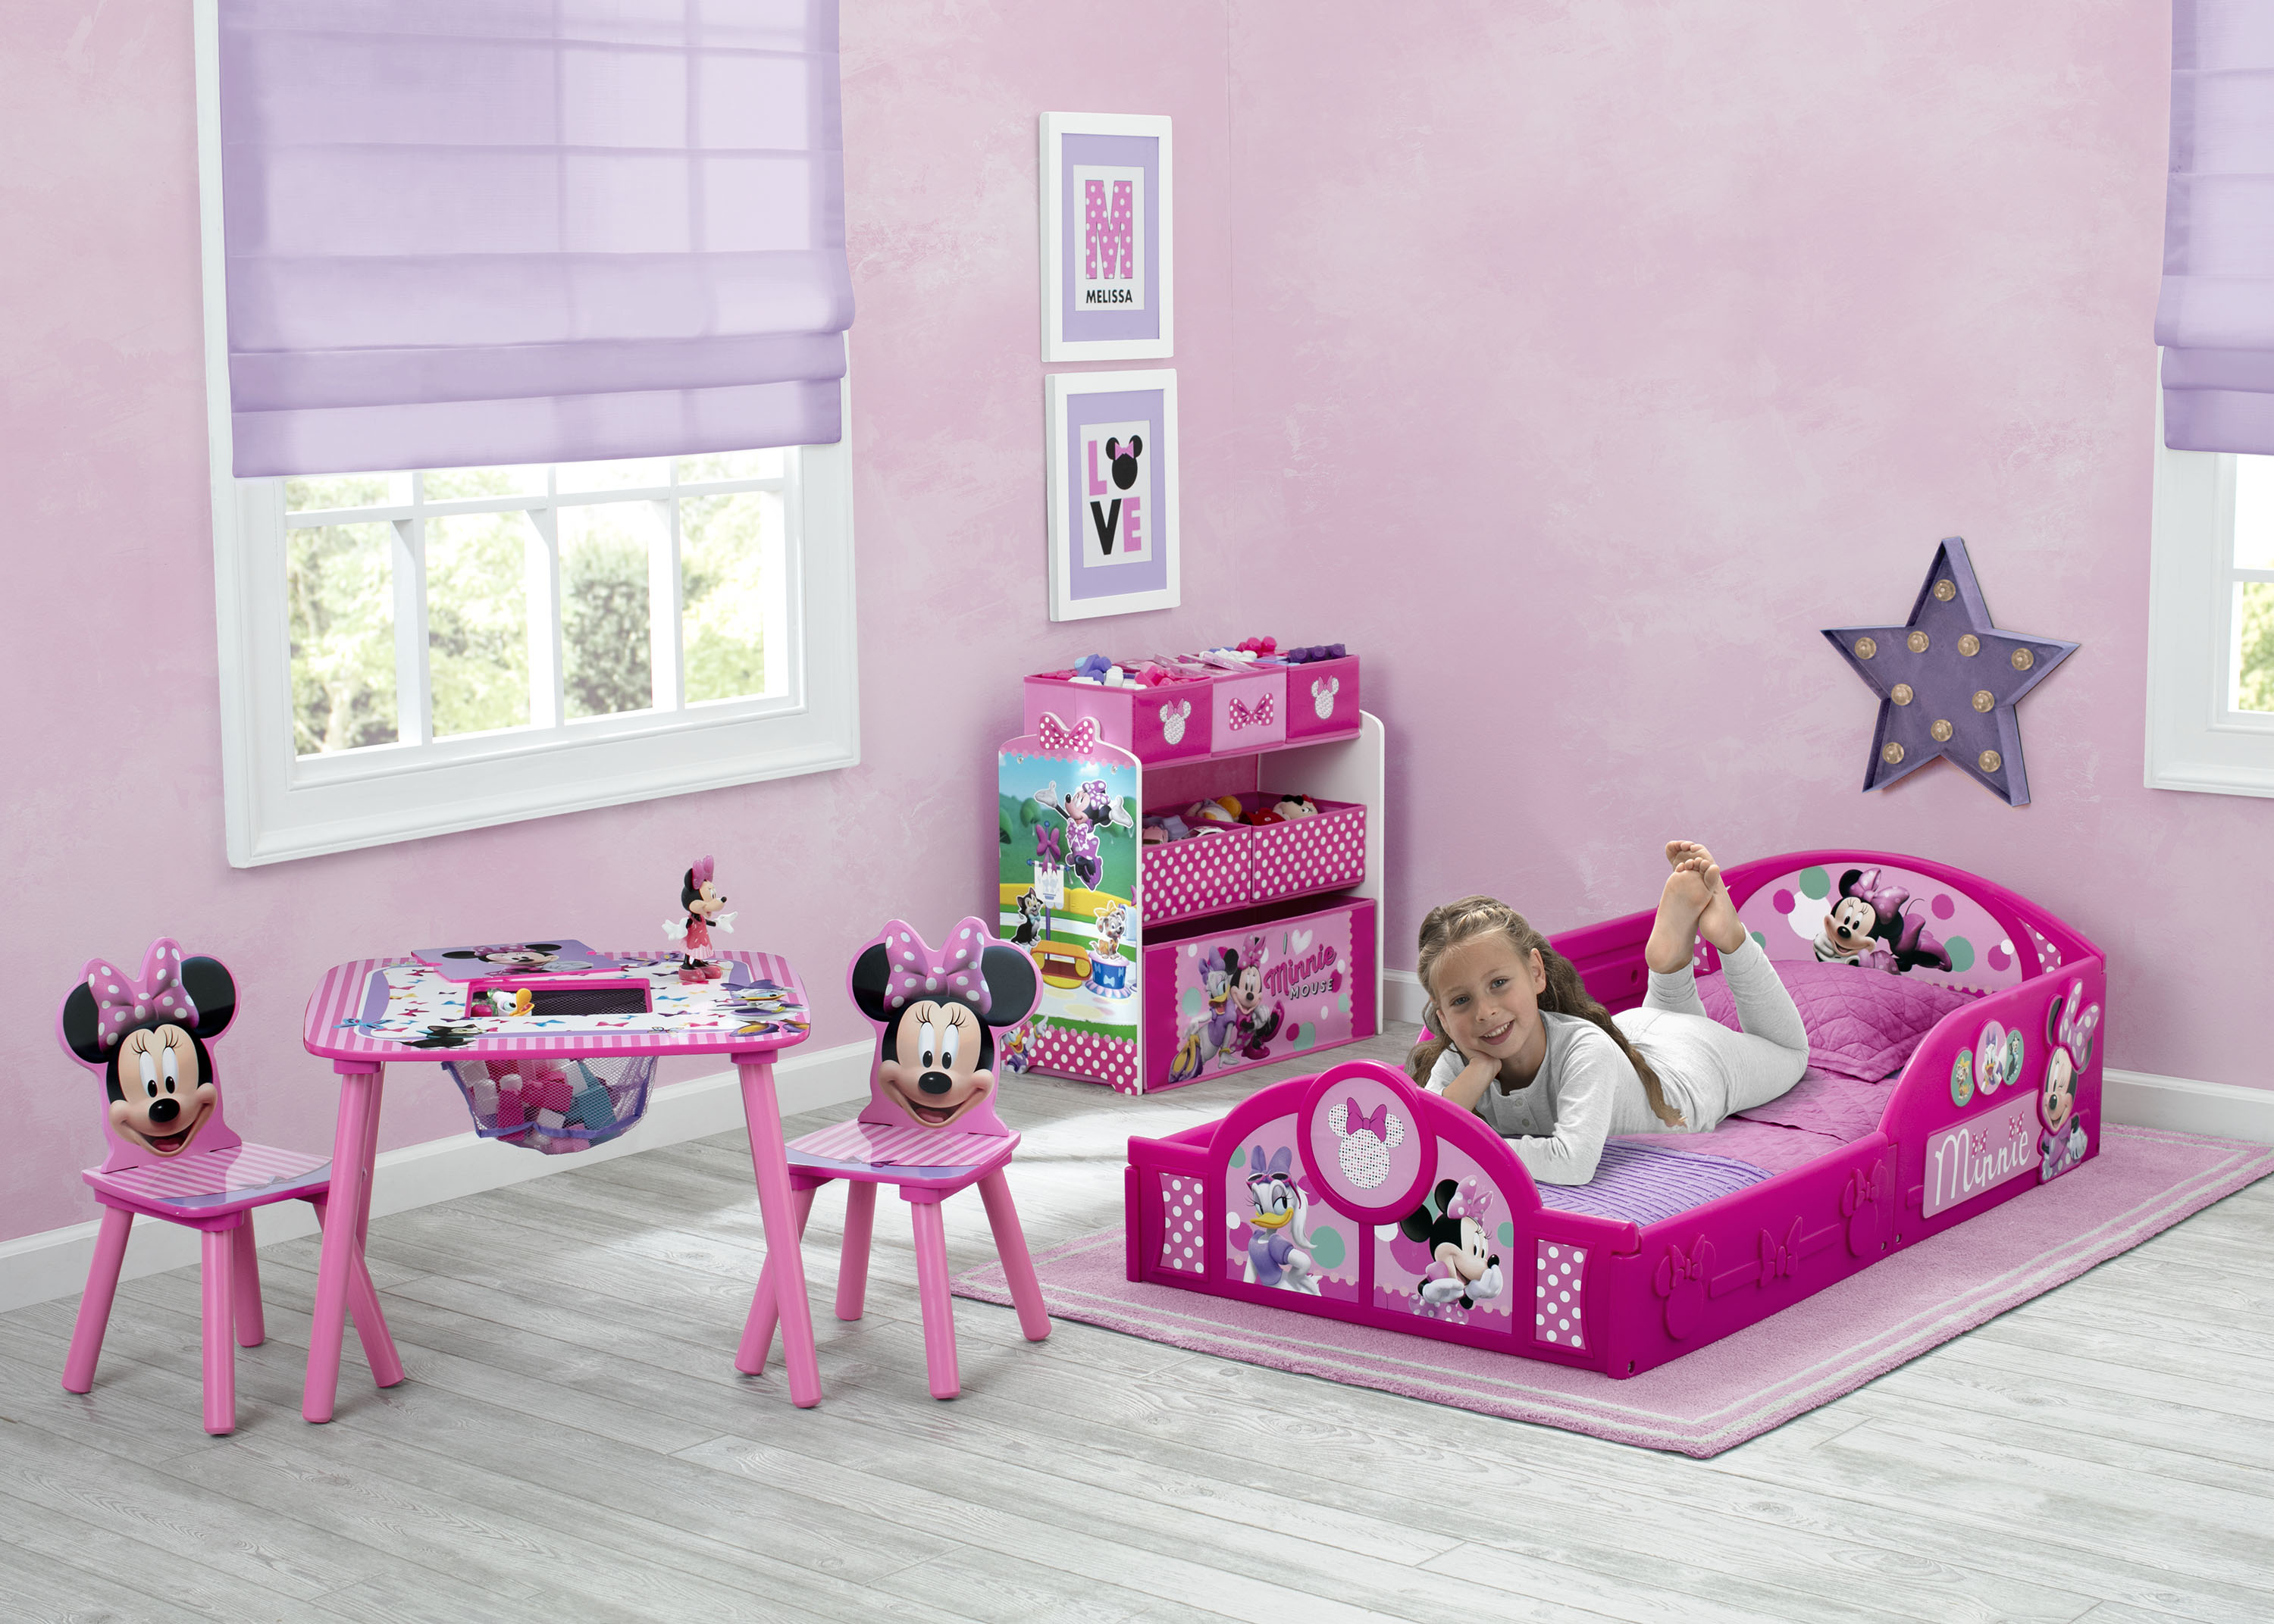 Disney Minnie Mouse Plastic Sleep and Play Toddler Bed by Delta Children - image 5 of 9